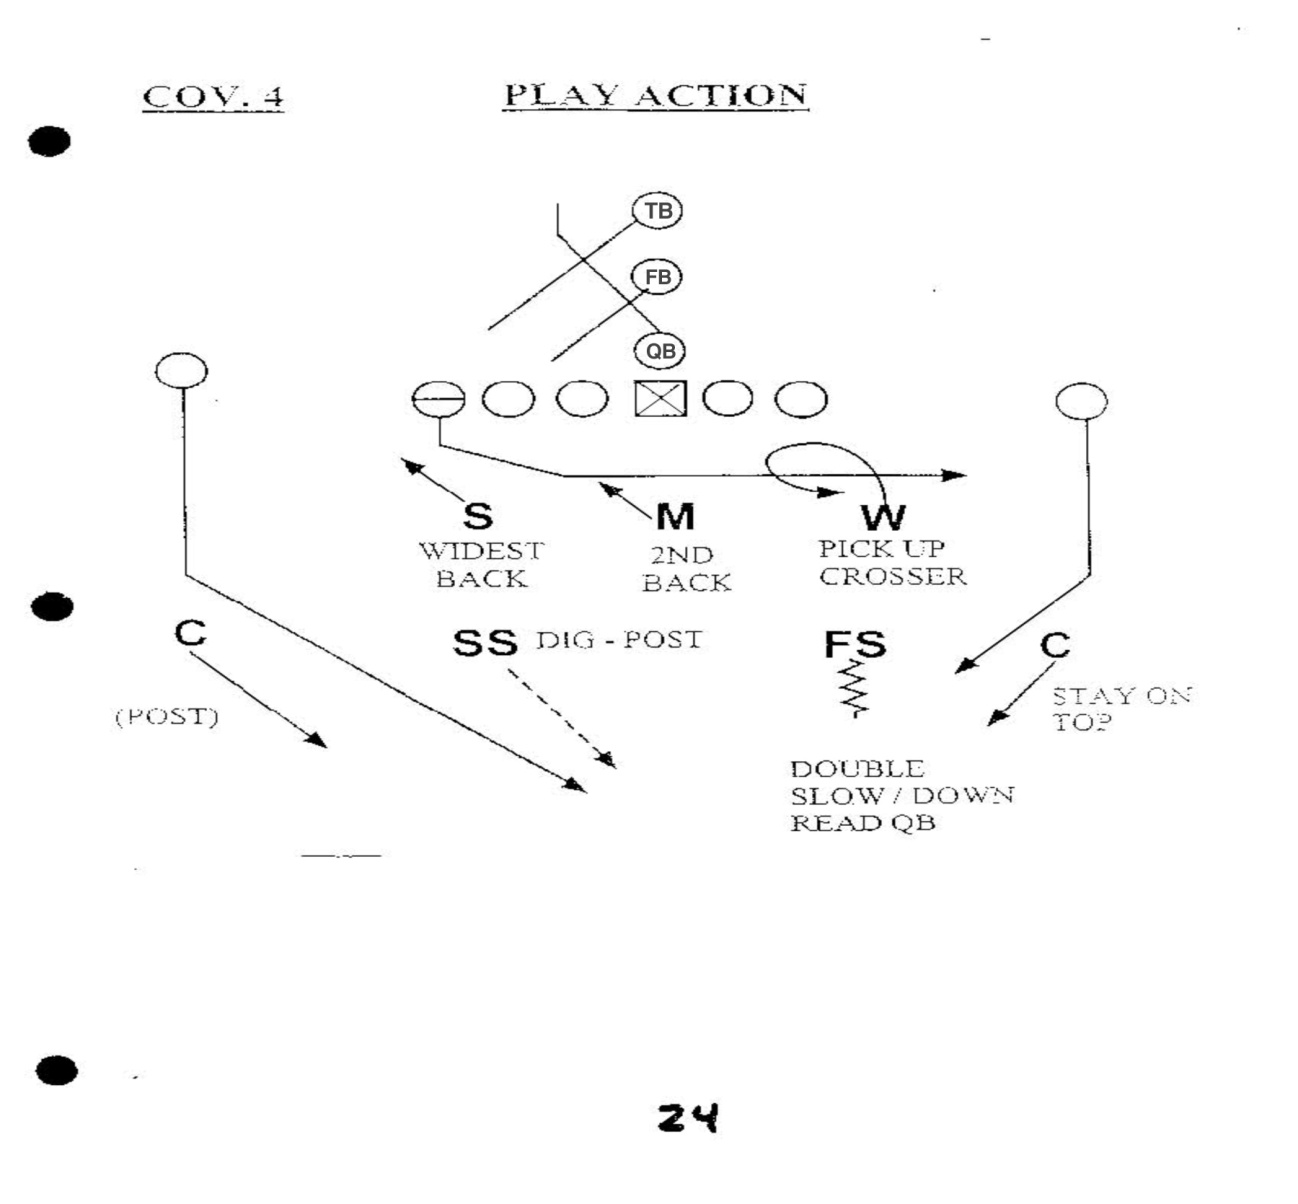 Diagram of a football play from an Auburn playbook. Individual players are identified as circles, while opponents are letter abbreviations. All players' movements are outlined with basic arrows pointing toward their destinations.